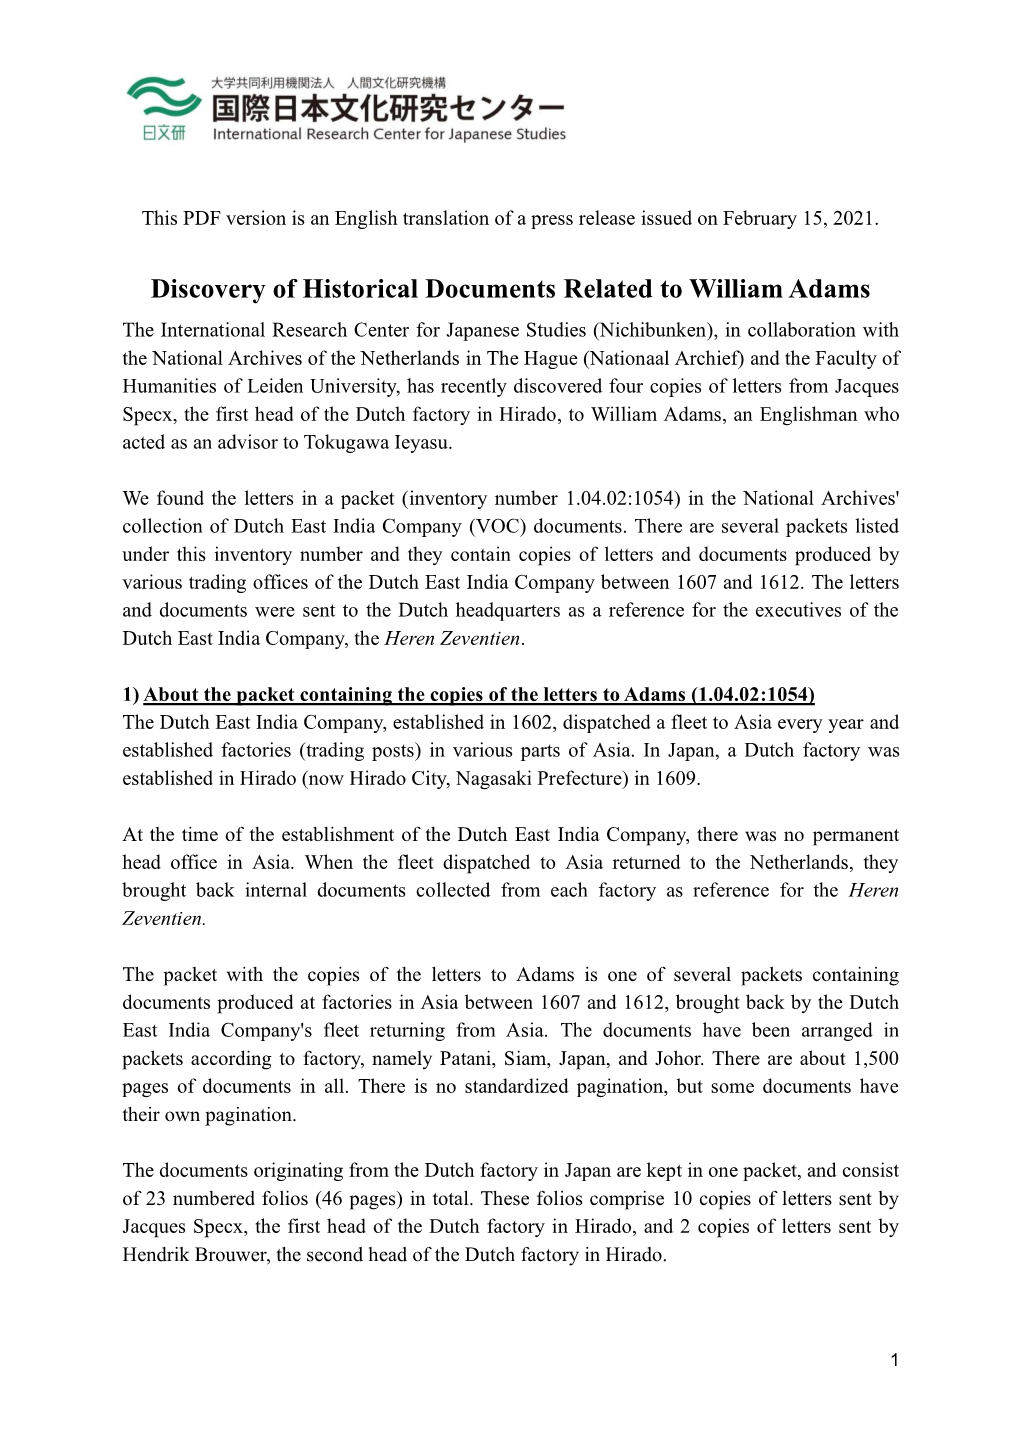 Discovery of Historical Documents Related to William Adams